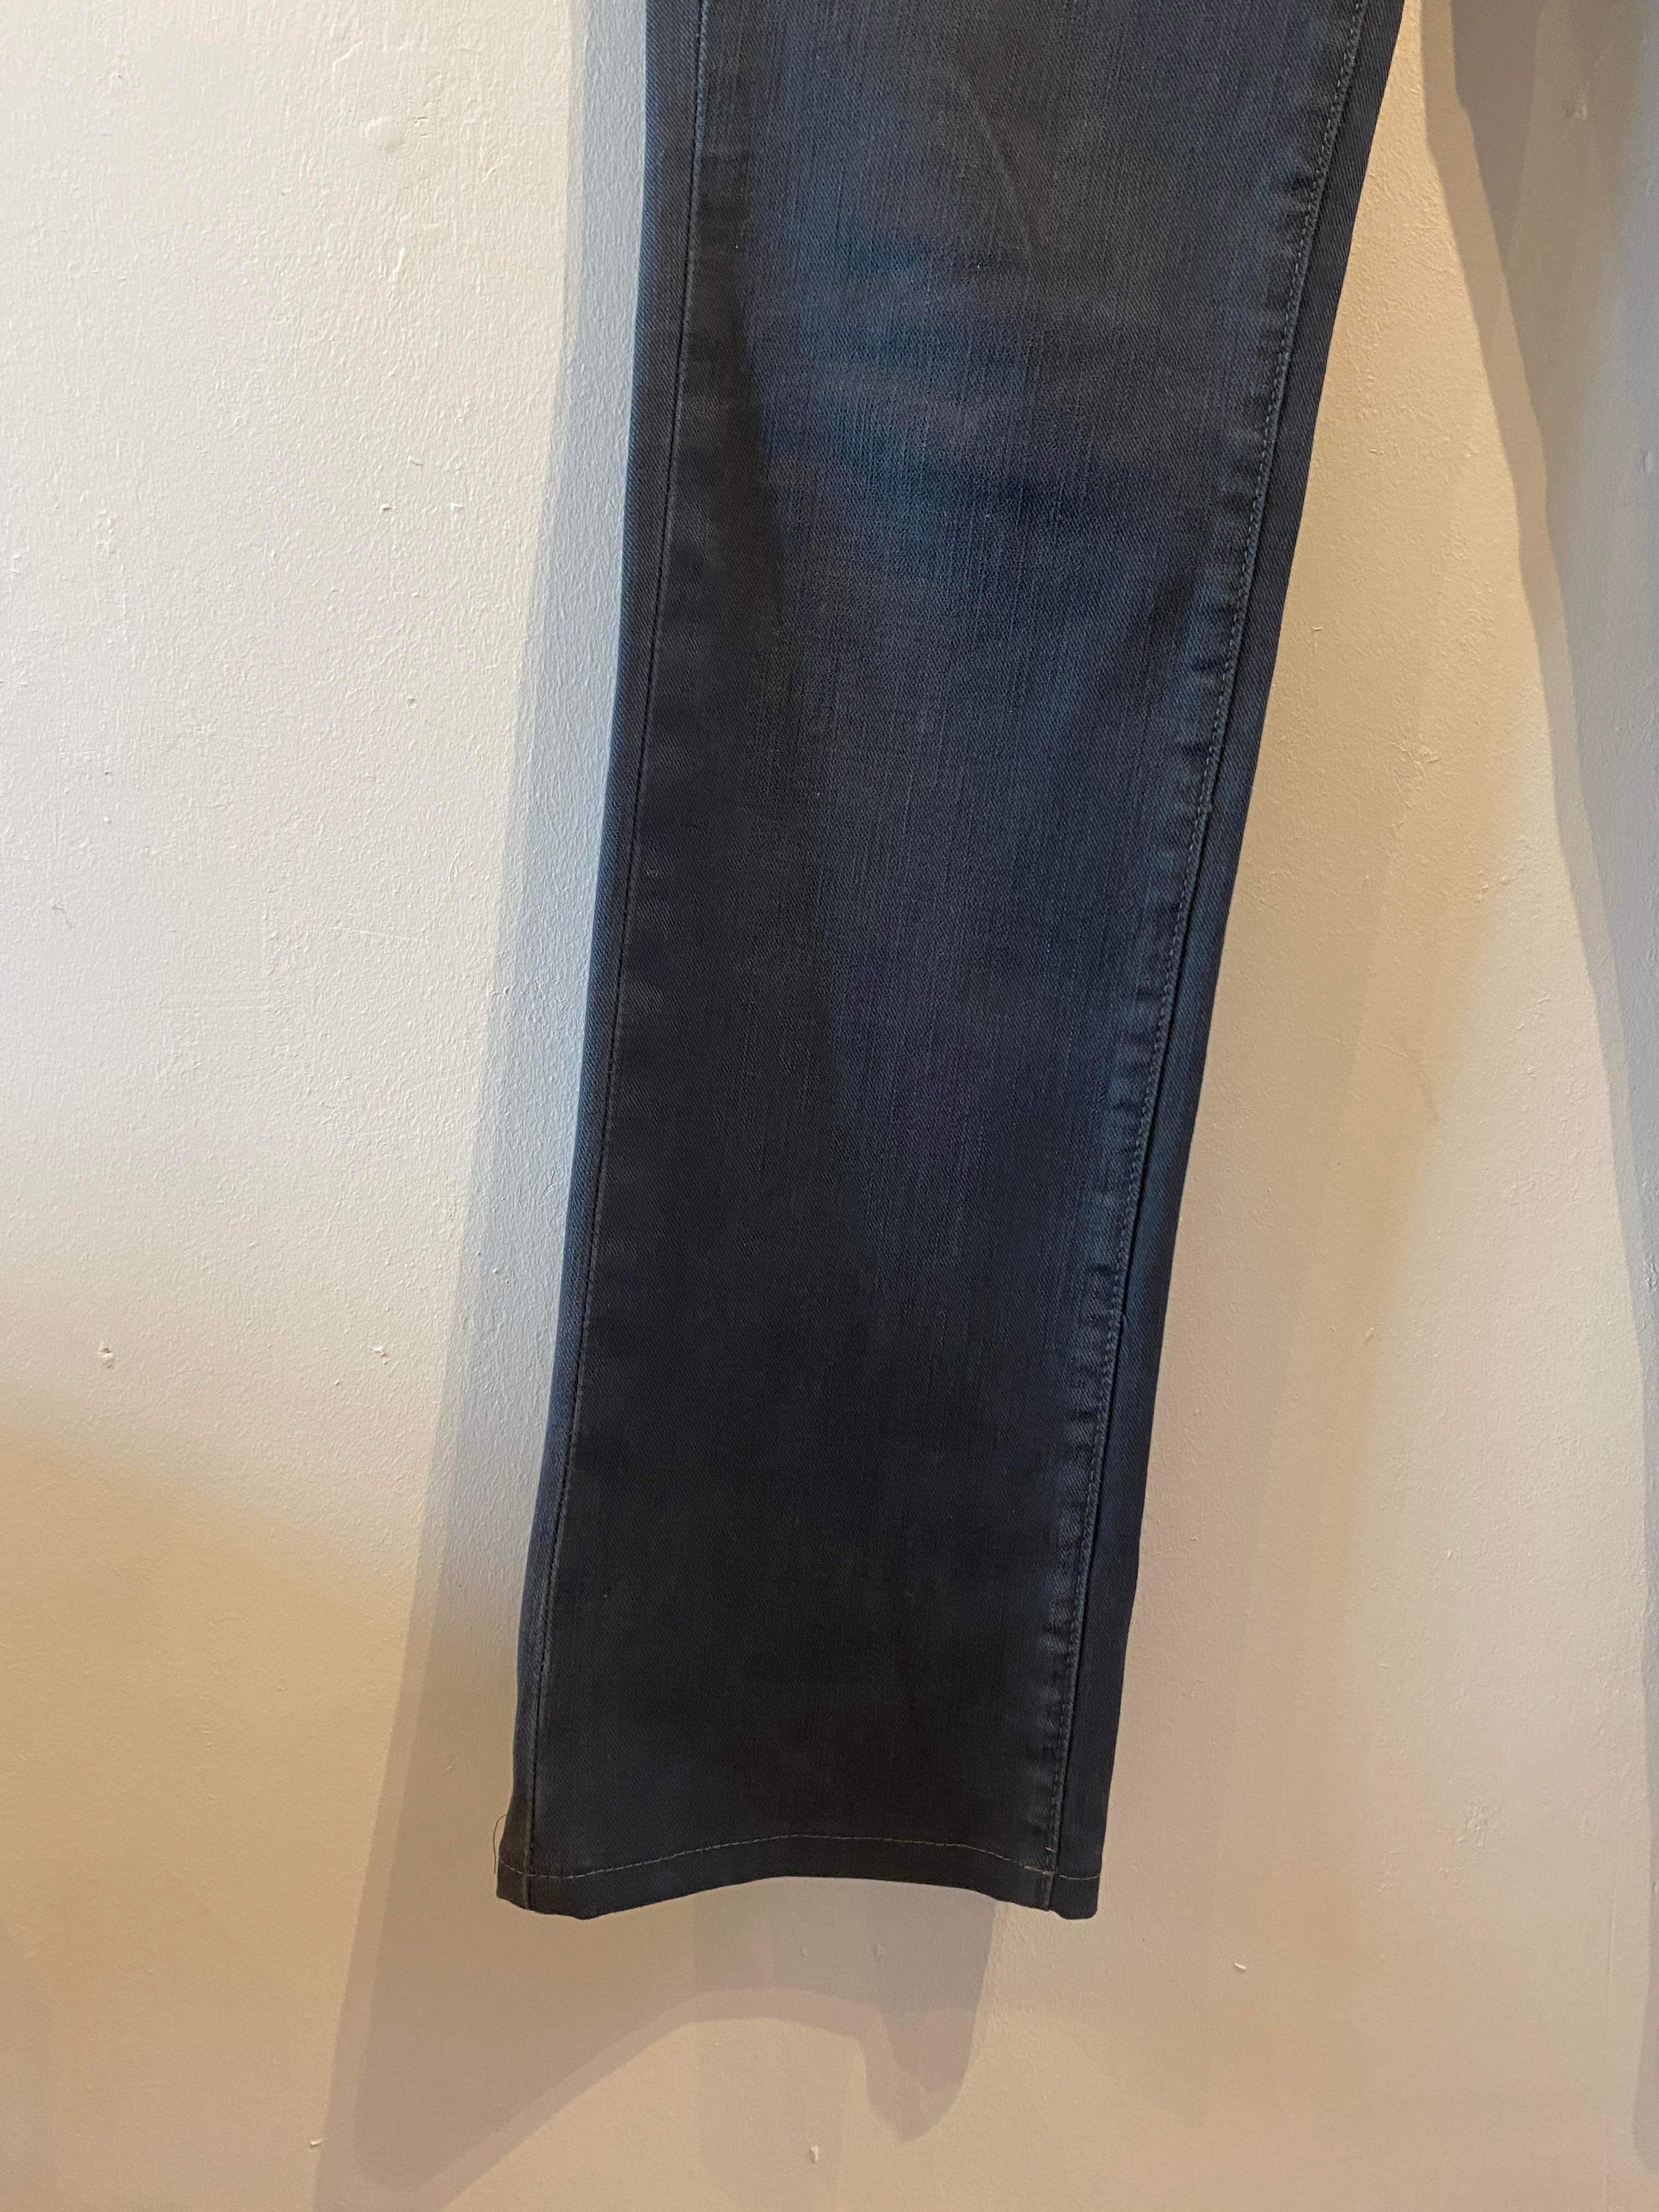 7 for all Mankind - Jeans - Size: 27